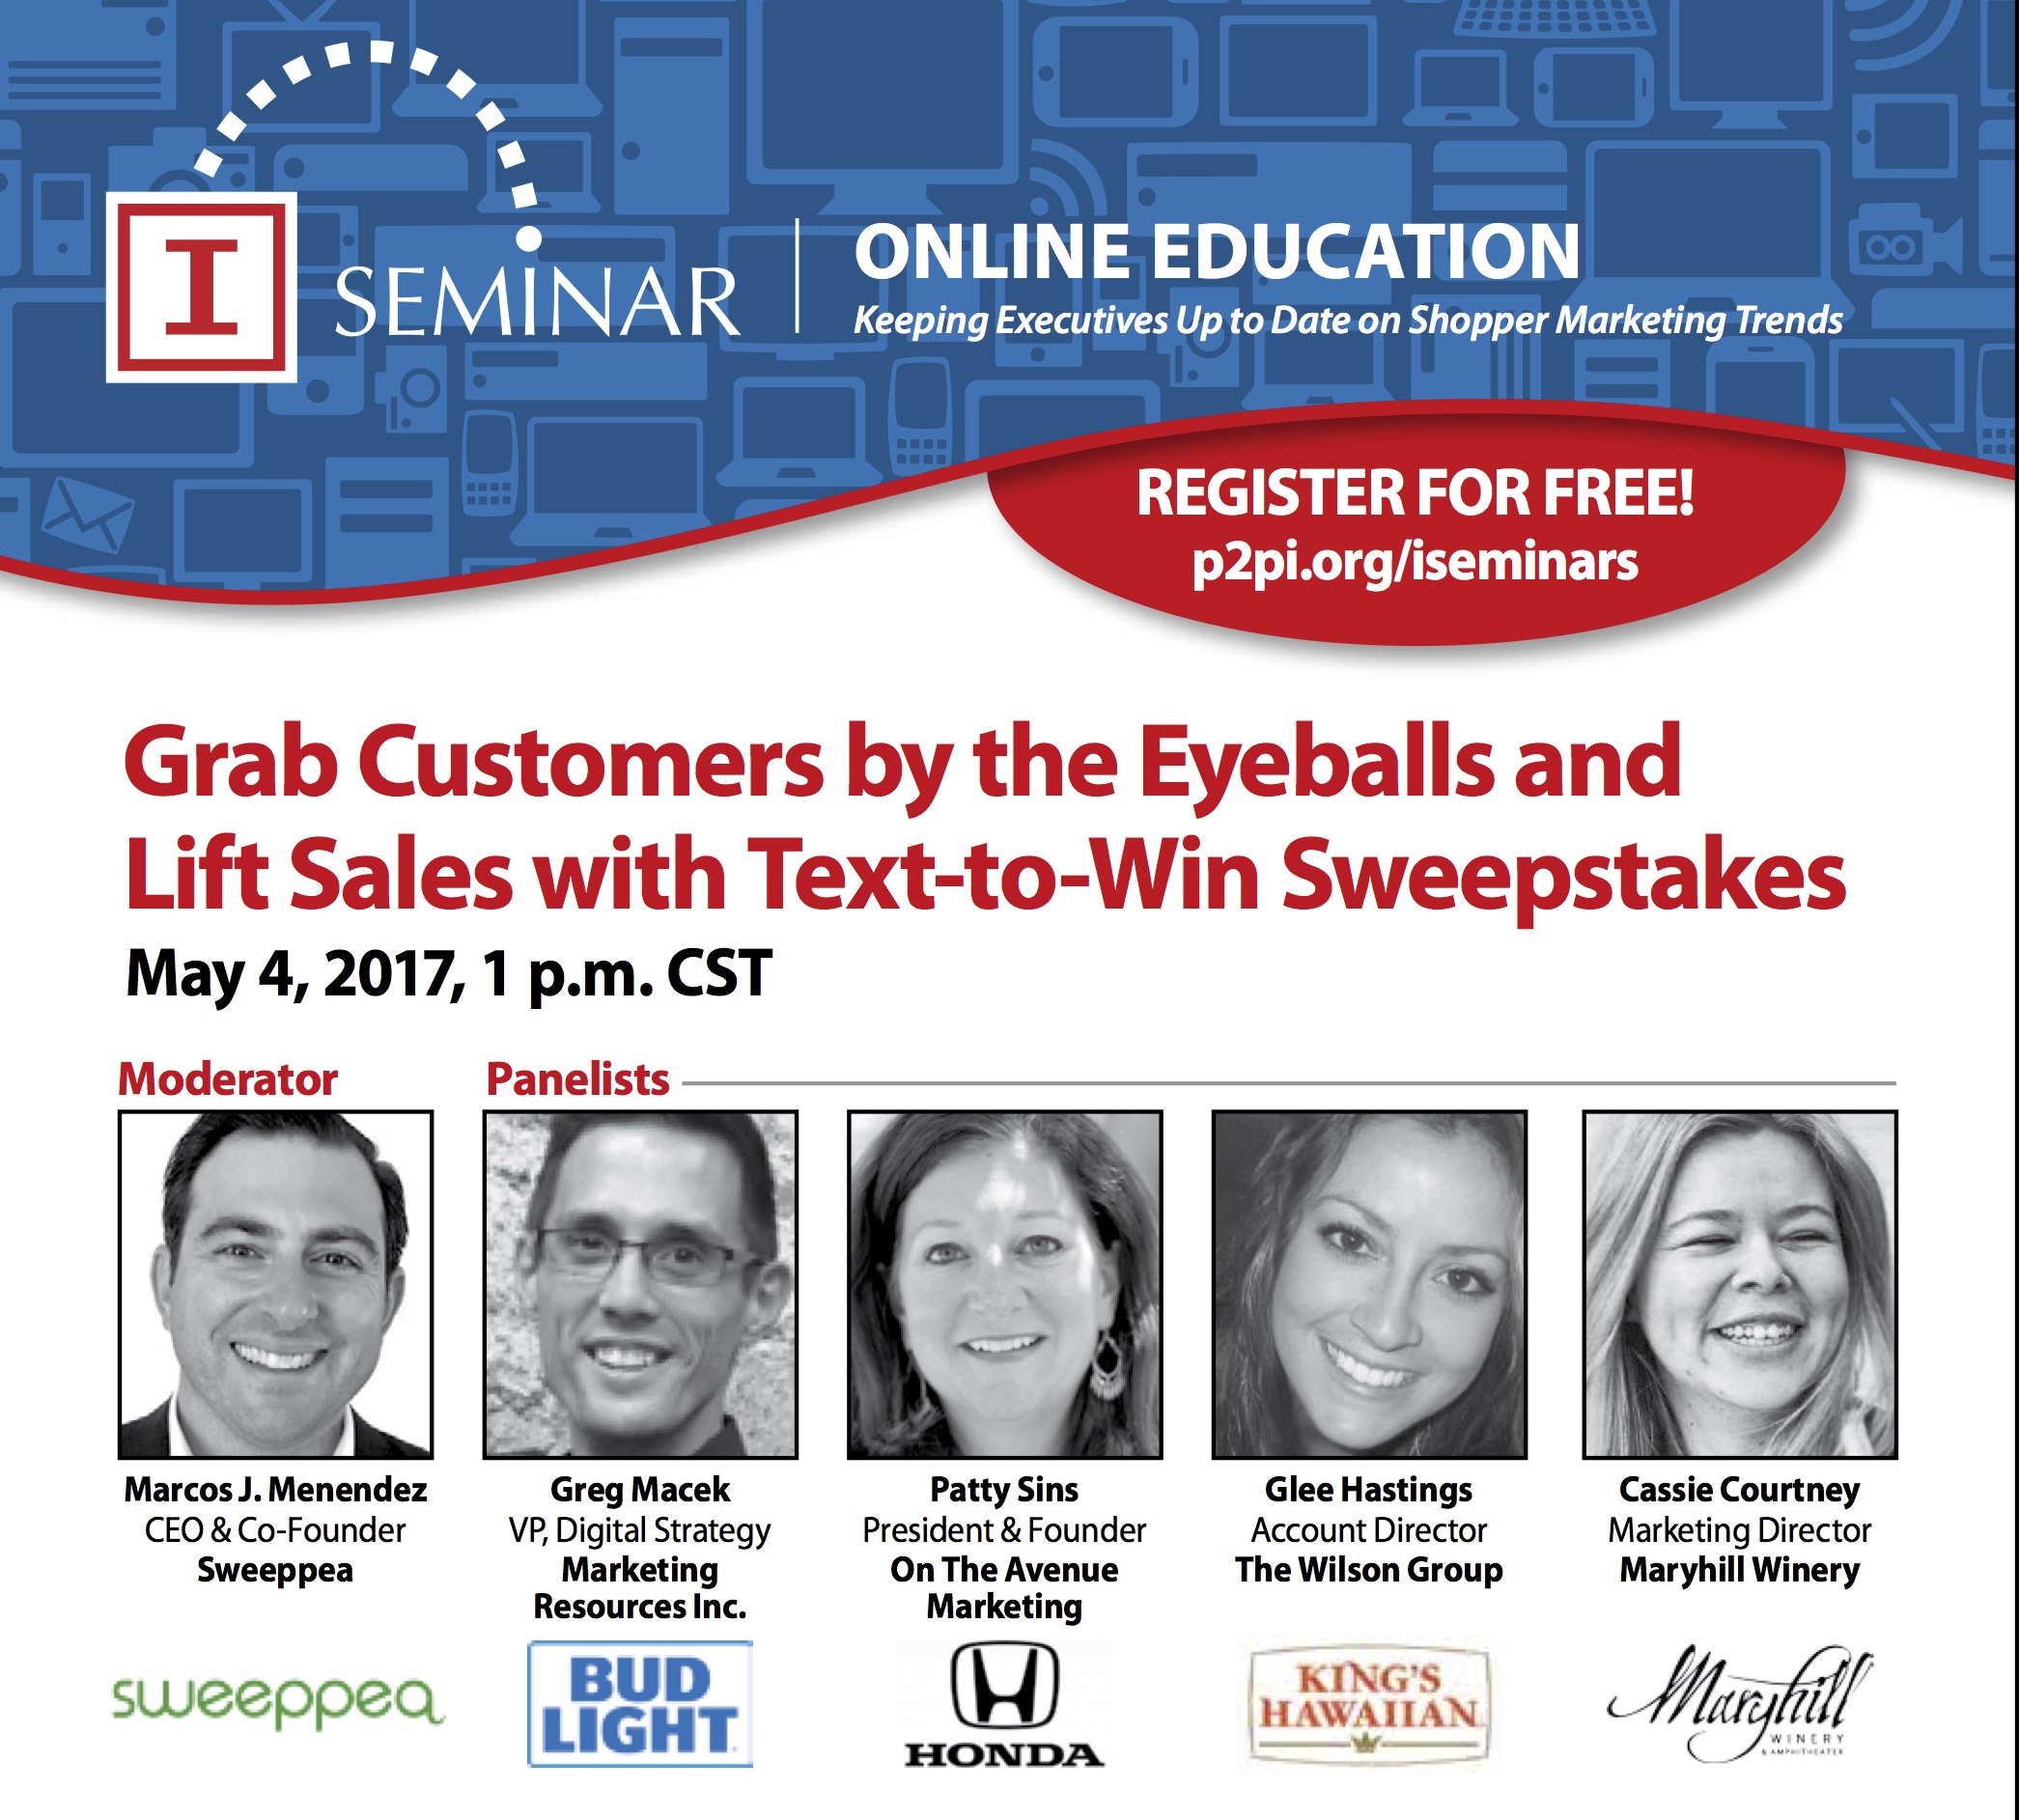 Learn How to Grab Customers and Lift Sales with Text-to-Win Sweepstakes